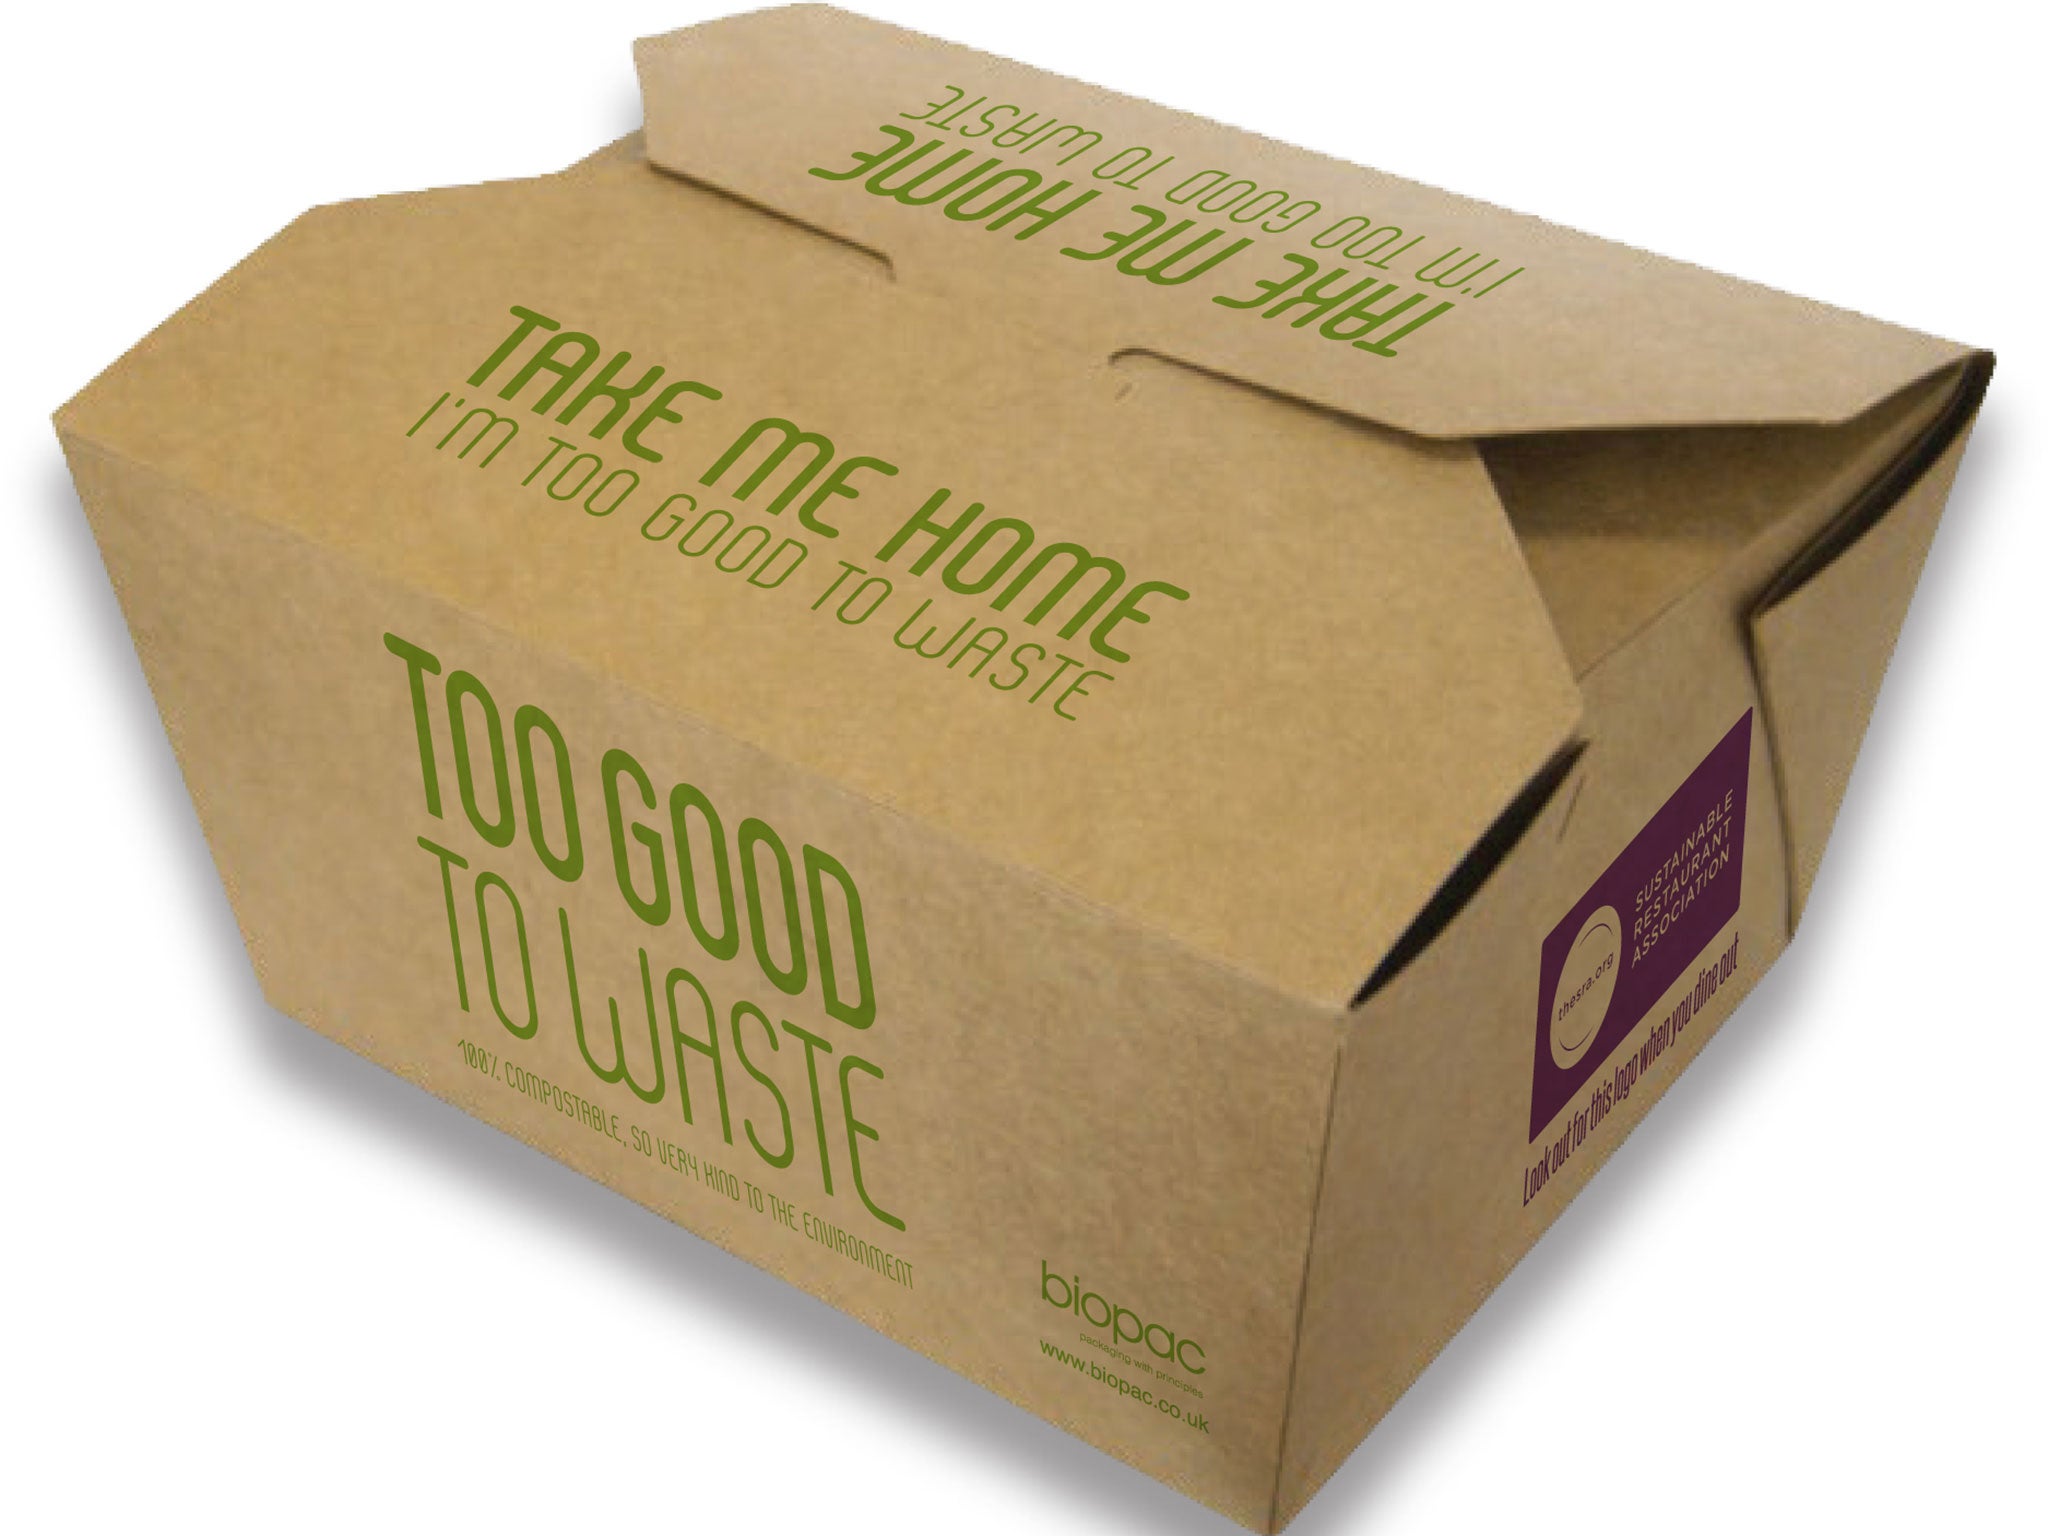 A box used as part of the SRA's Too Good to Waste campaign